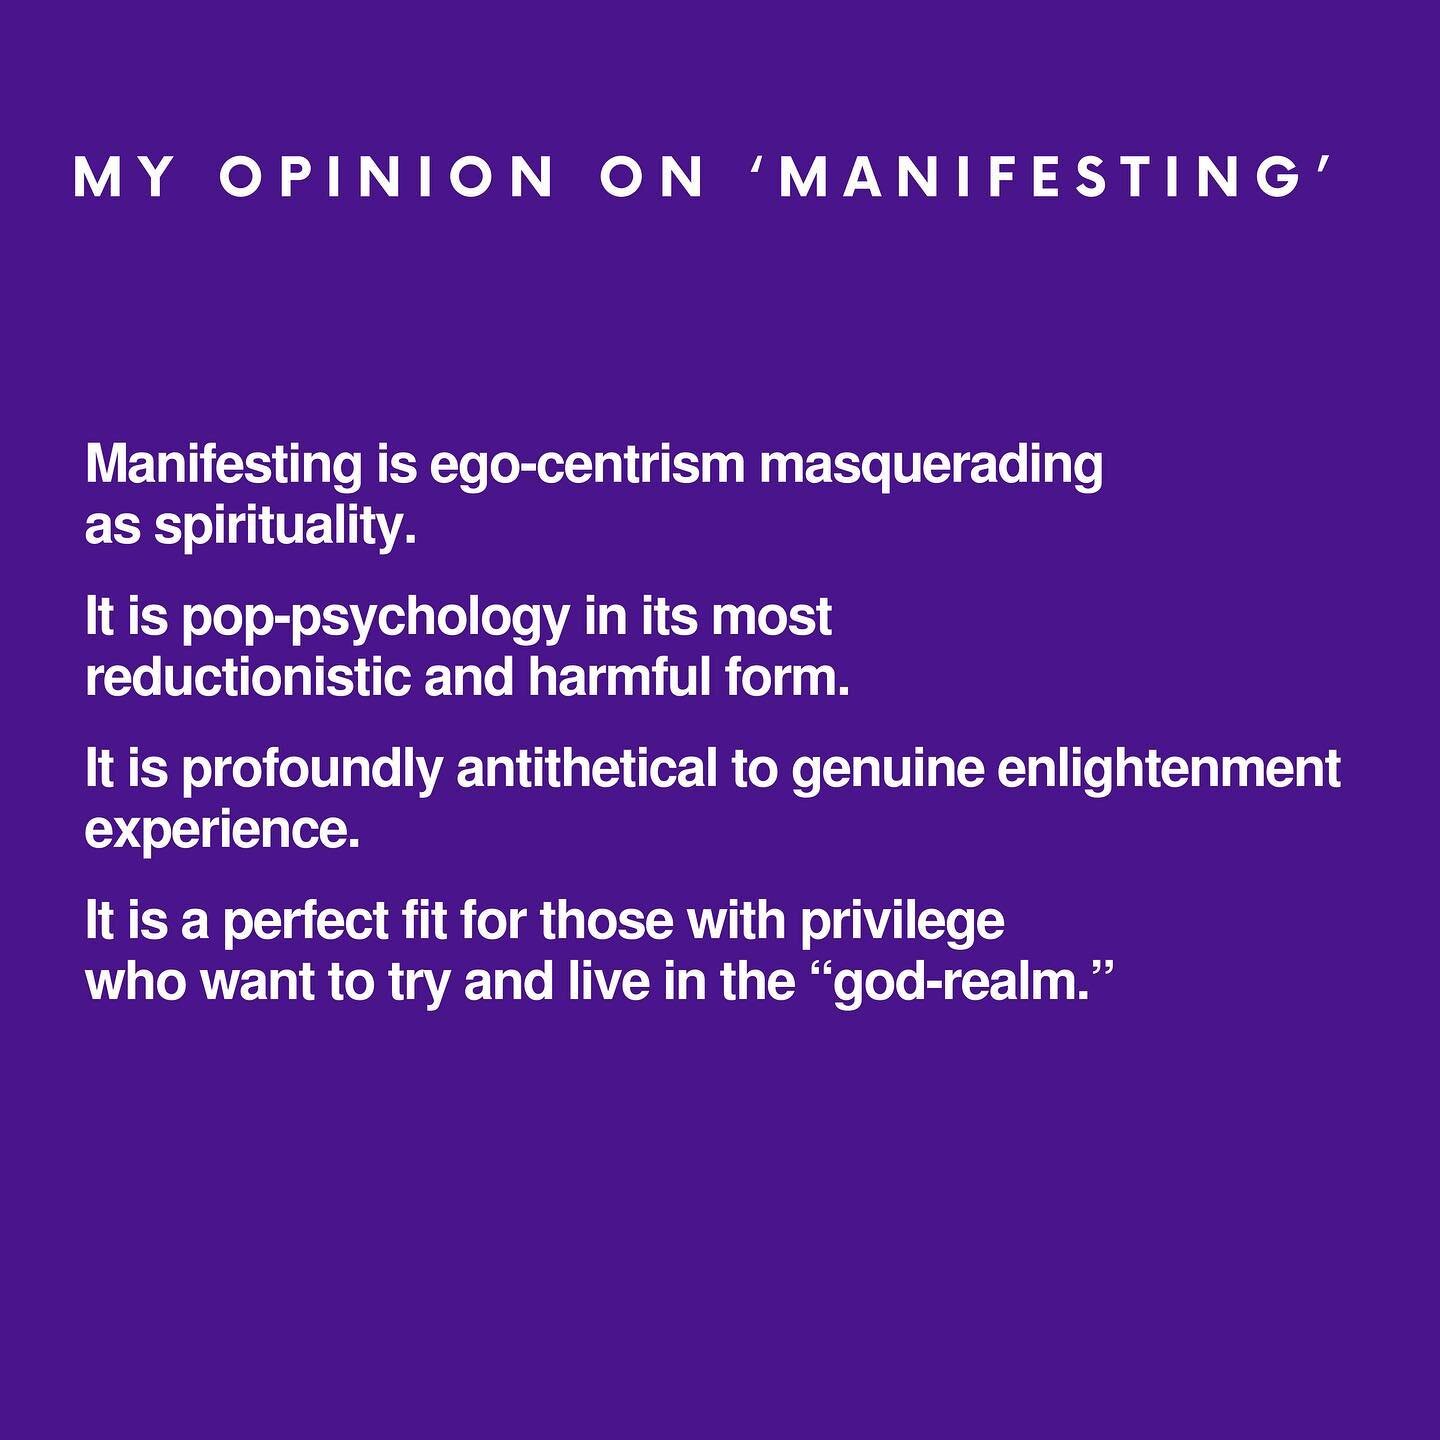 Questions about my other points on manifesting? Feel free to drop a line and I&rsquo;ll respond with another post (I could write a LOT more on the topic) #soggy #manifesting #manifestation #manifest #psychology #therapy #psychology #psychotherapy #ju